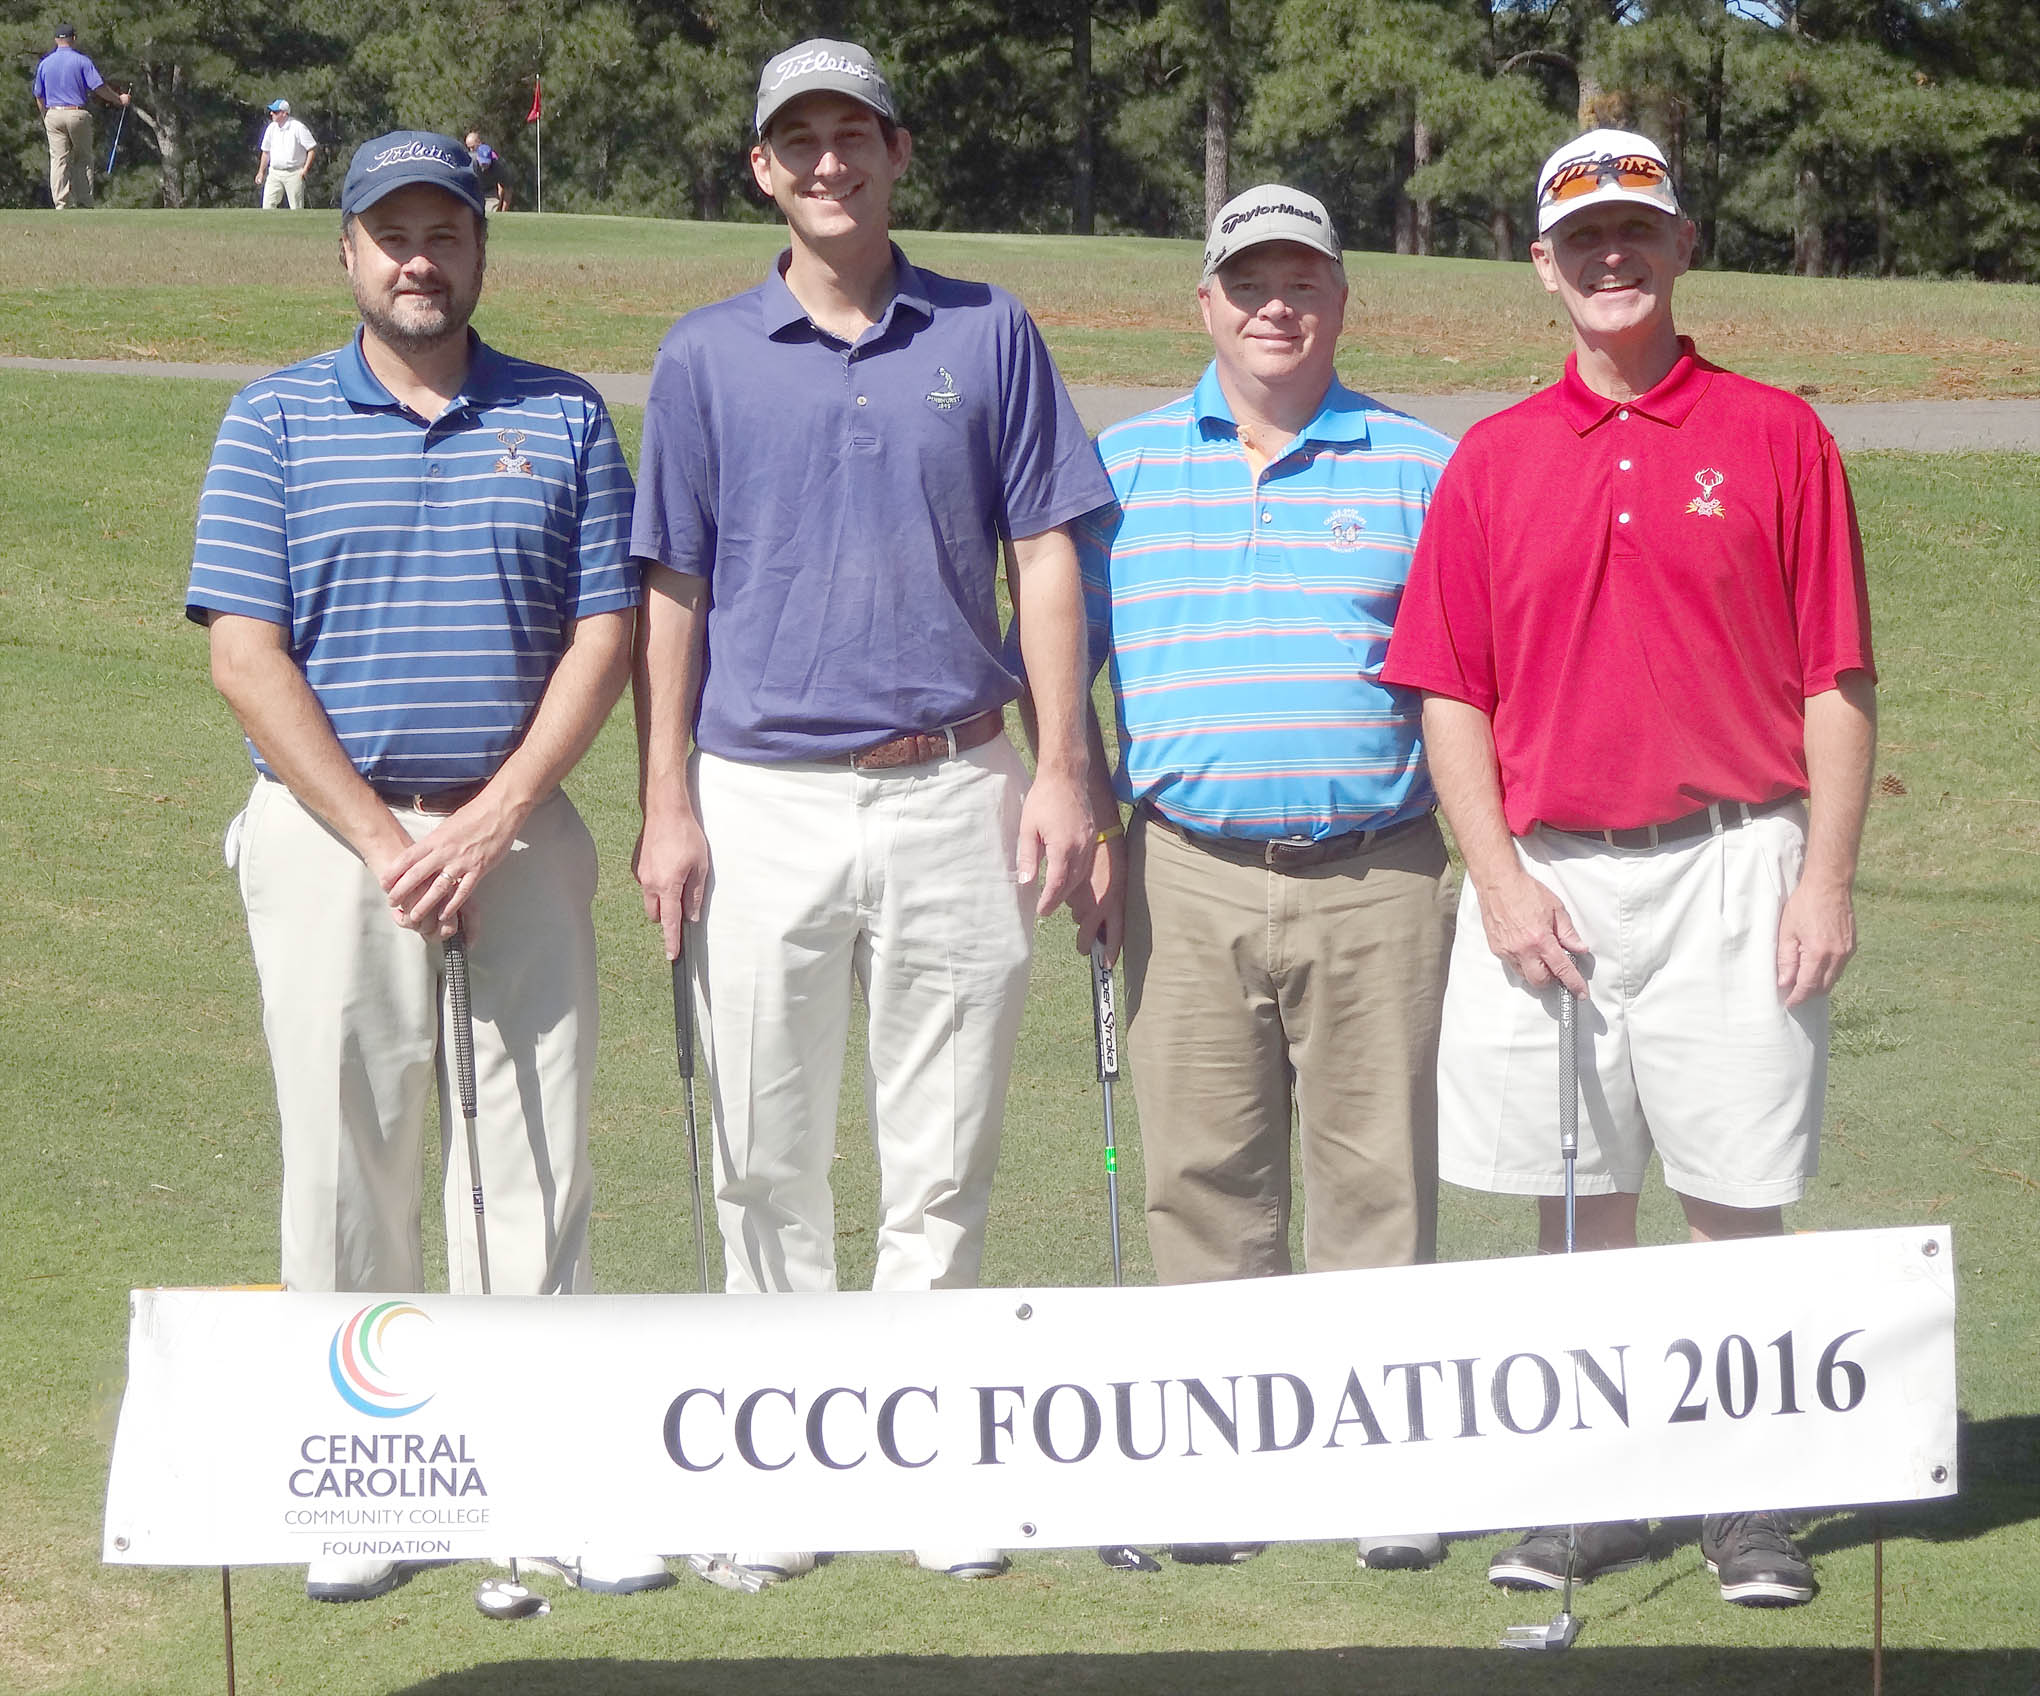 Click to enlarge,  The team of Alan Holt, Bill Kwasnick, Ron Minter, and Tom McSwain won the second flight of the morning tournament of the CCCC Foundation Lee Golf Classic. 